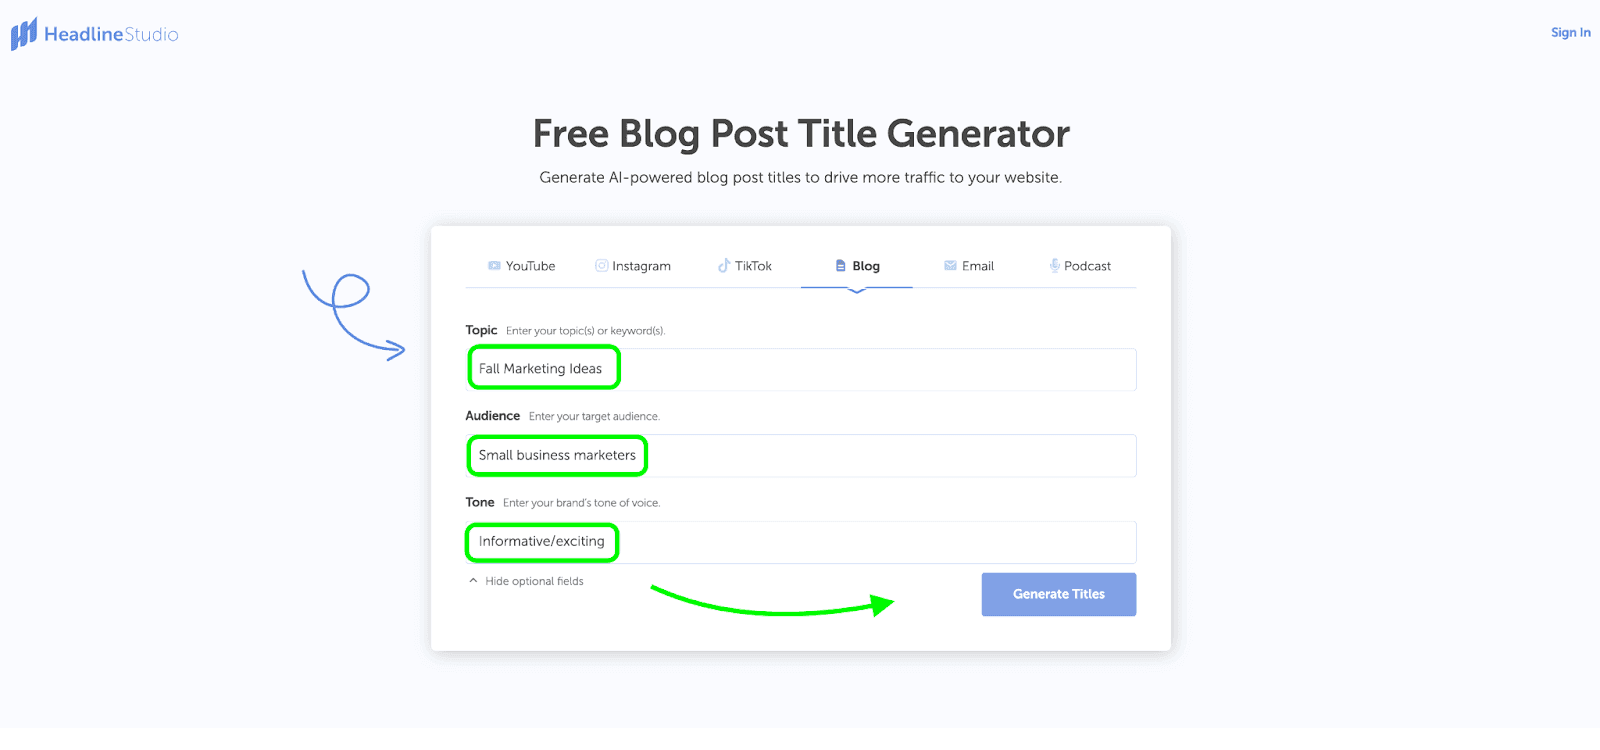 CoSchedule's free blog post title generator with three fields - topic, audience, and tone